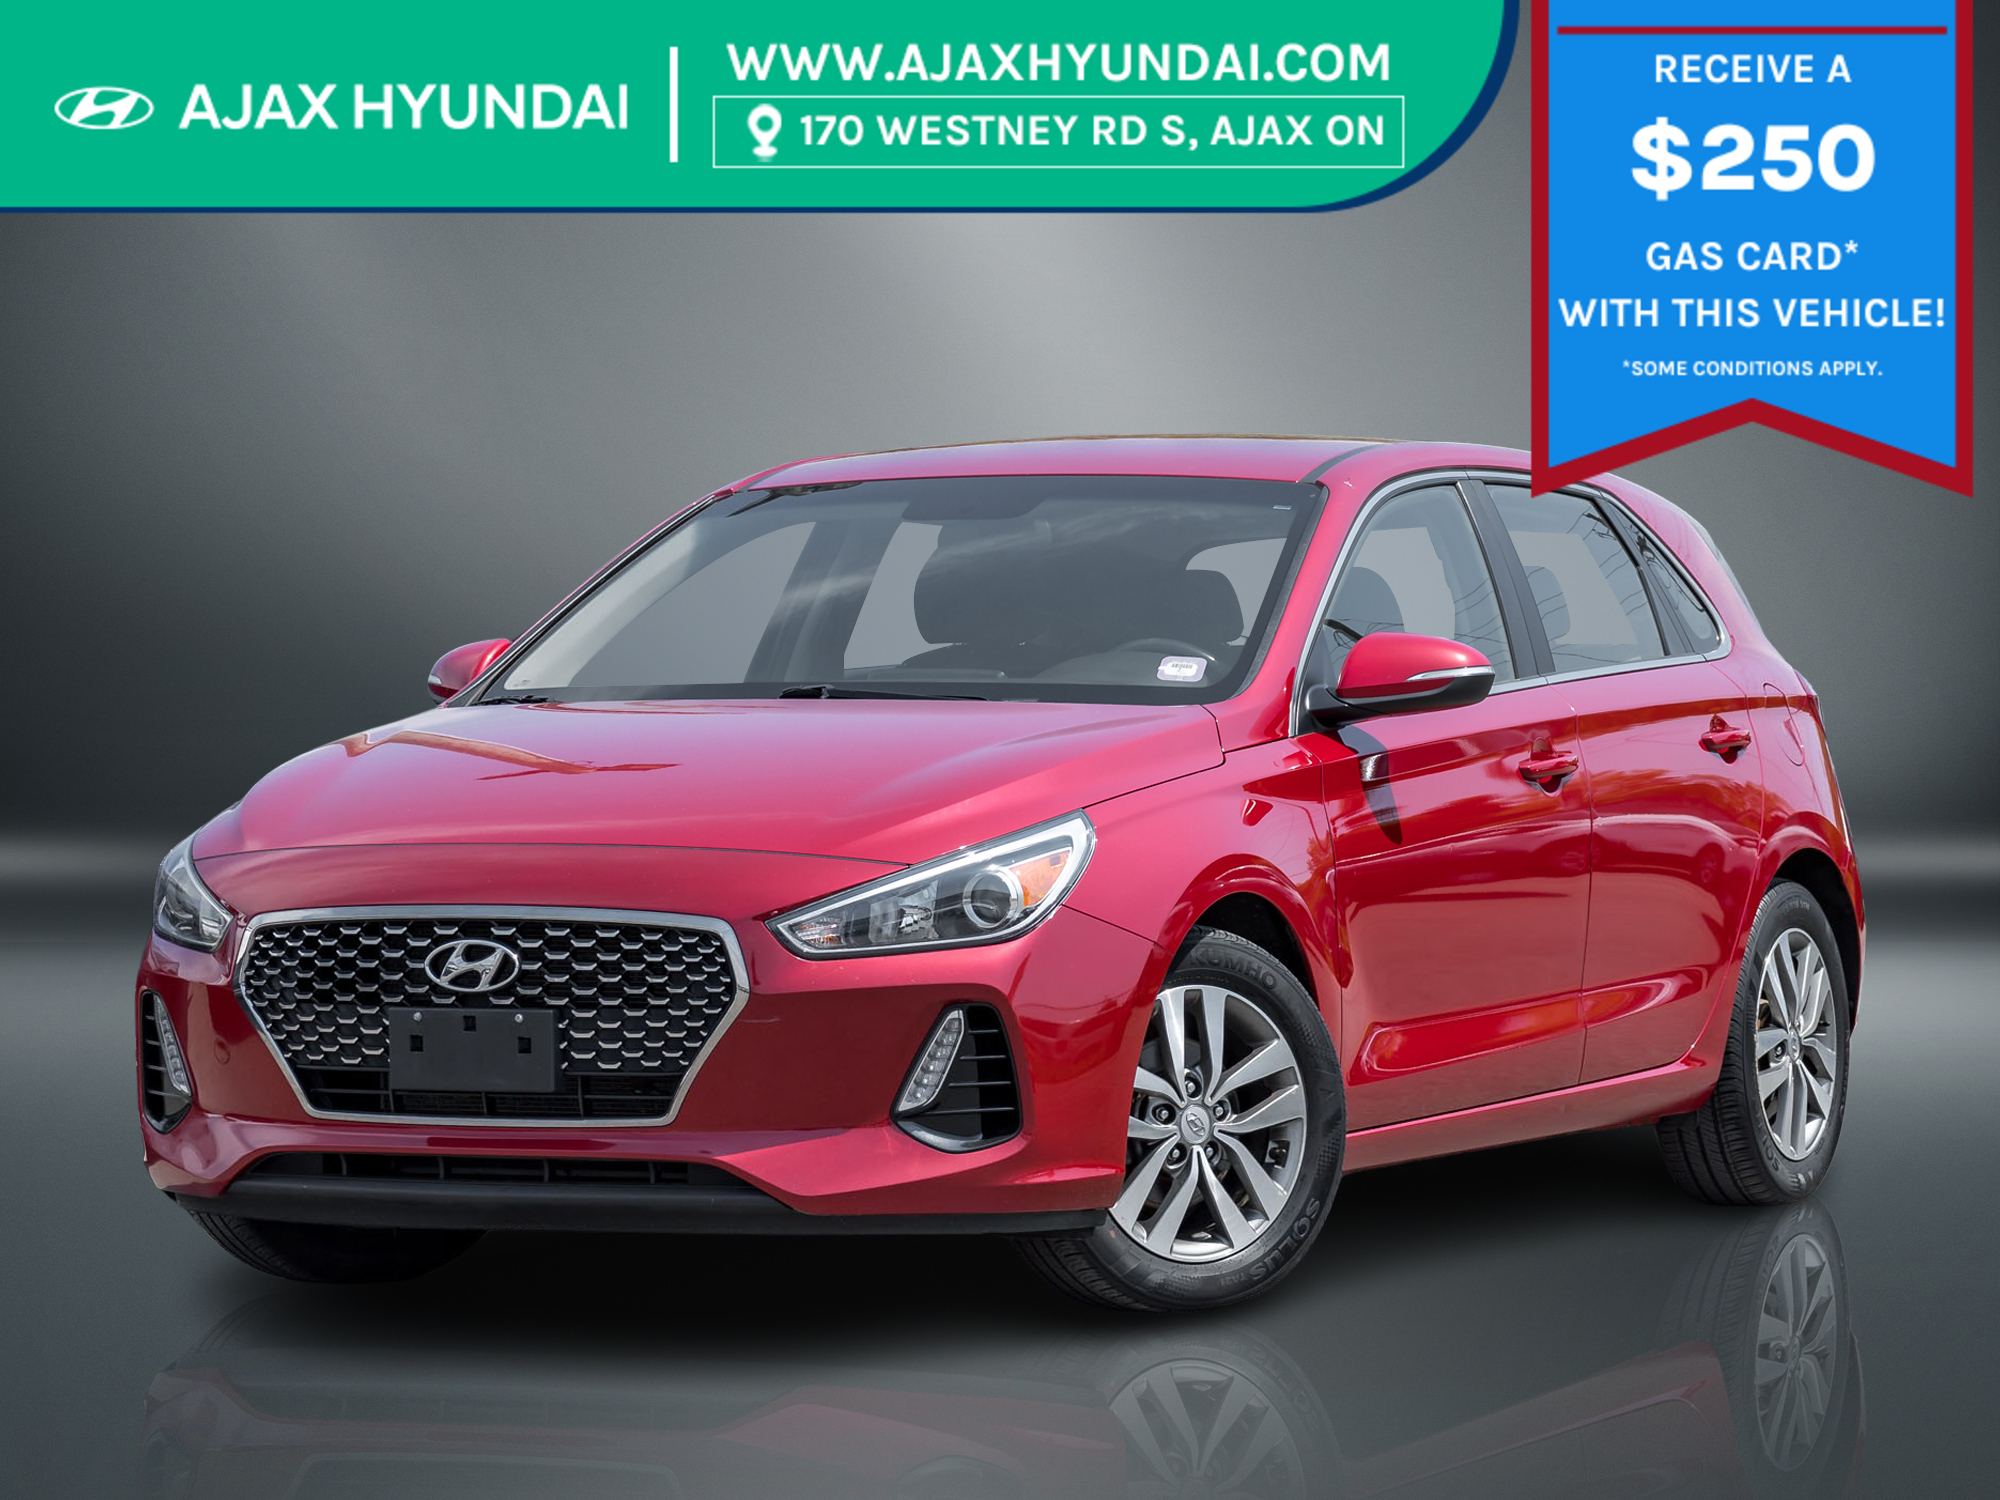 2019 Hyundai Elantra GT NO ACCIDENT | LOW KM | RATES FROM 4.99%